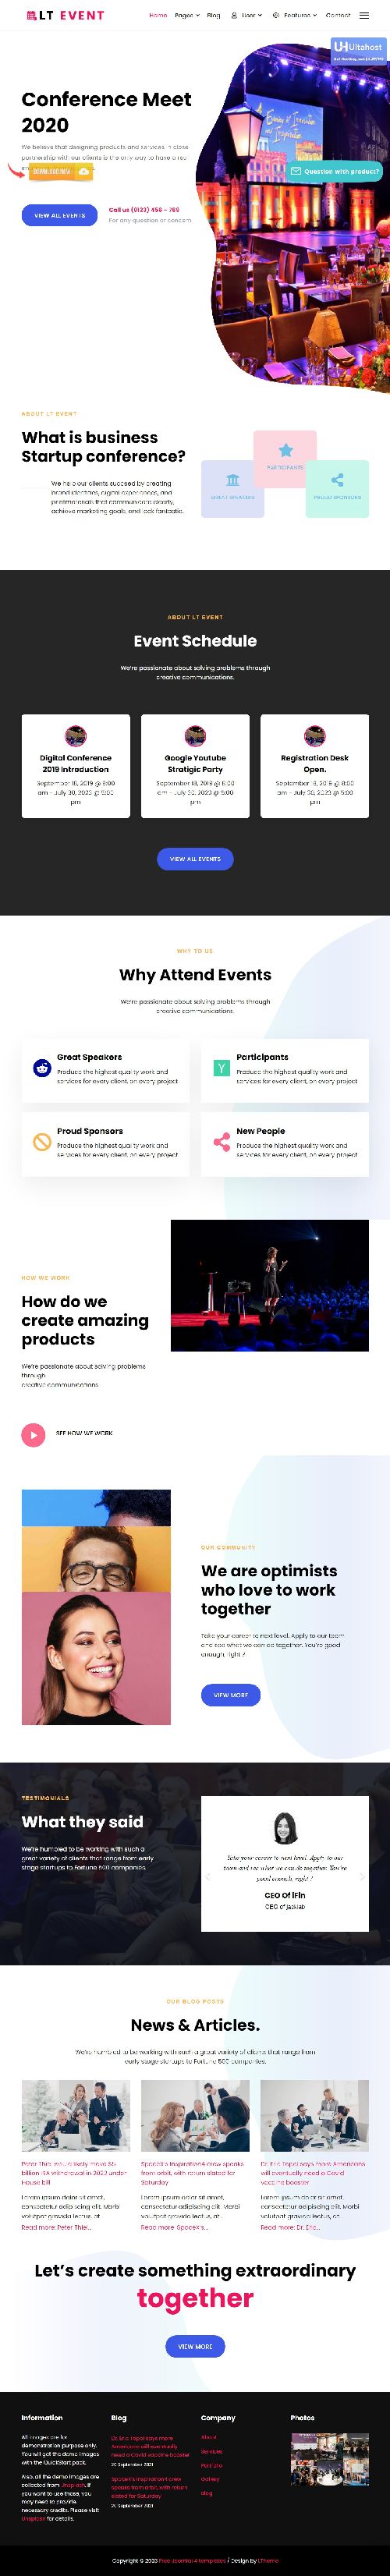 LT Event - Events and Conferences Joomla 4 Template